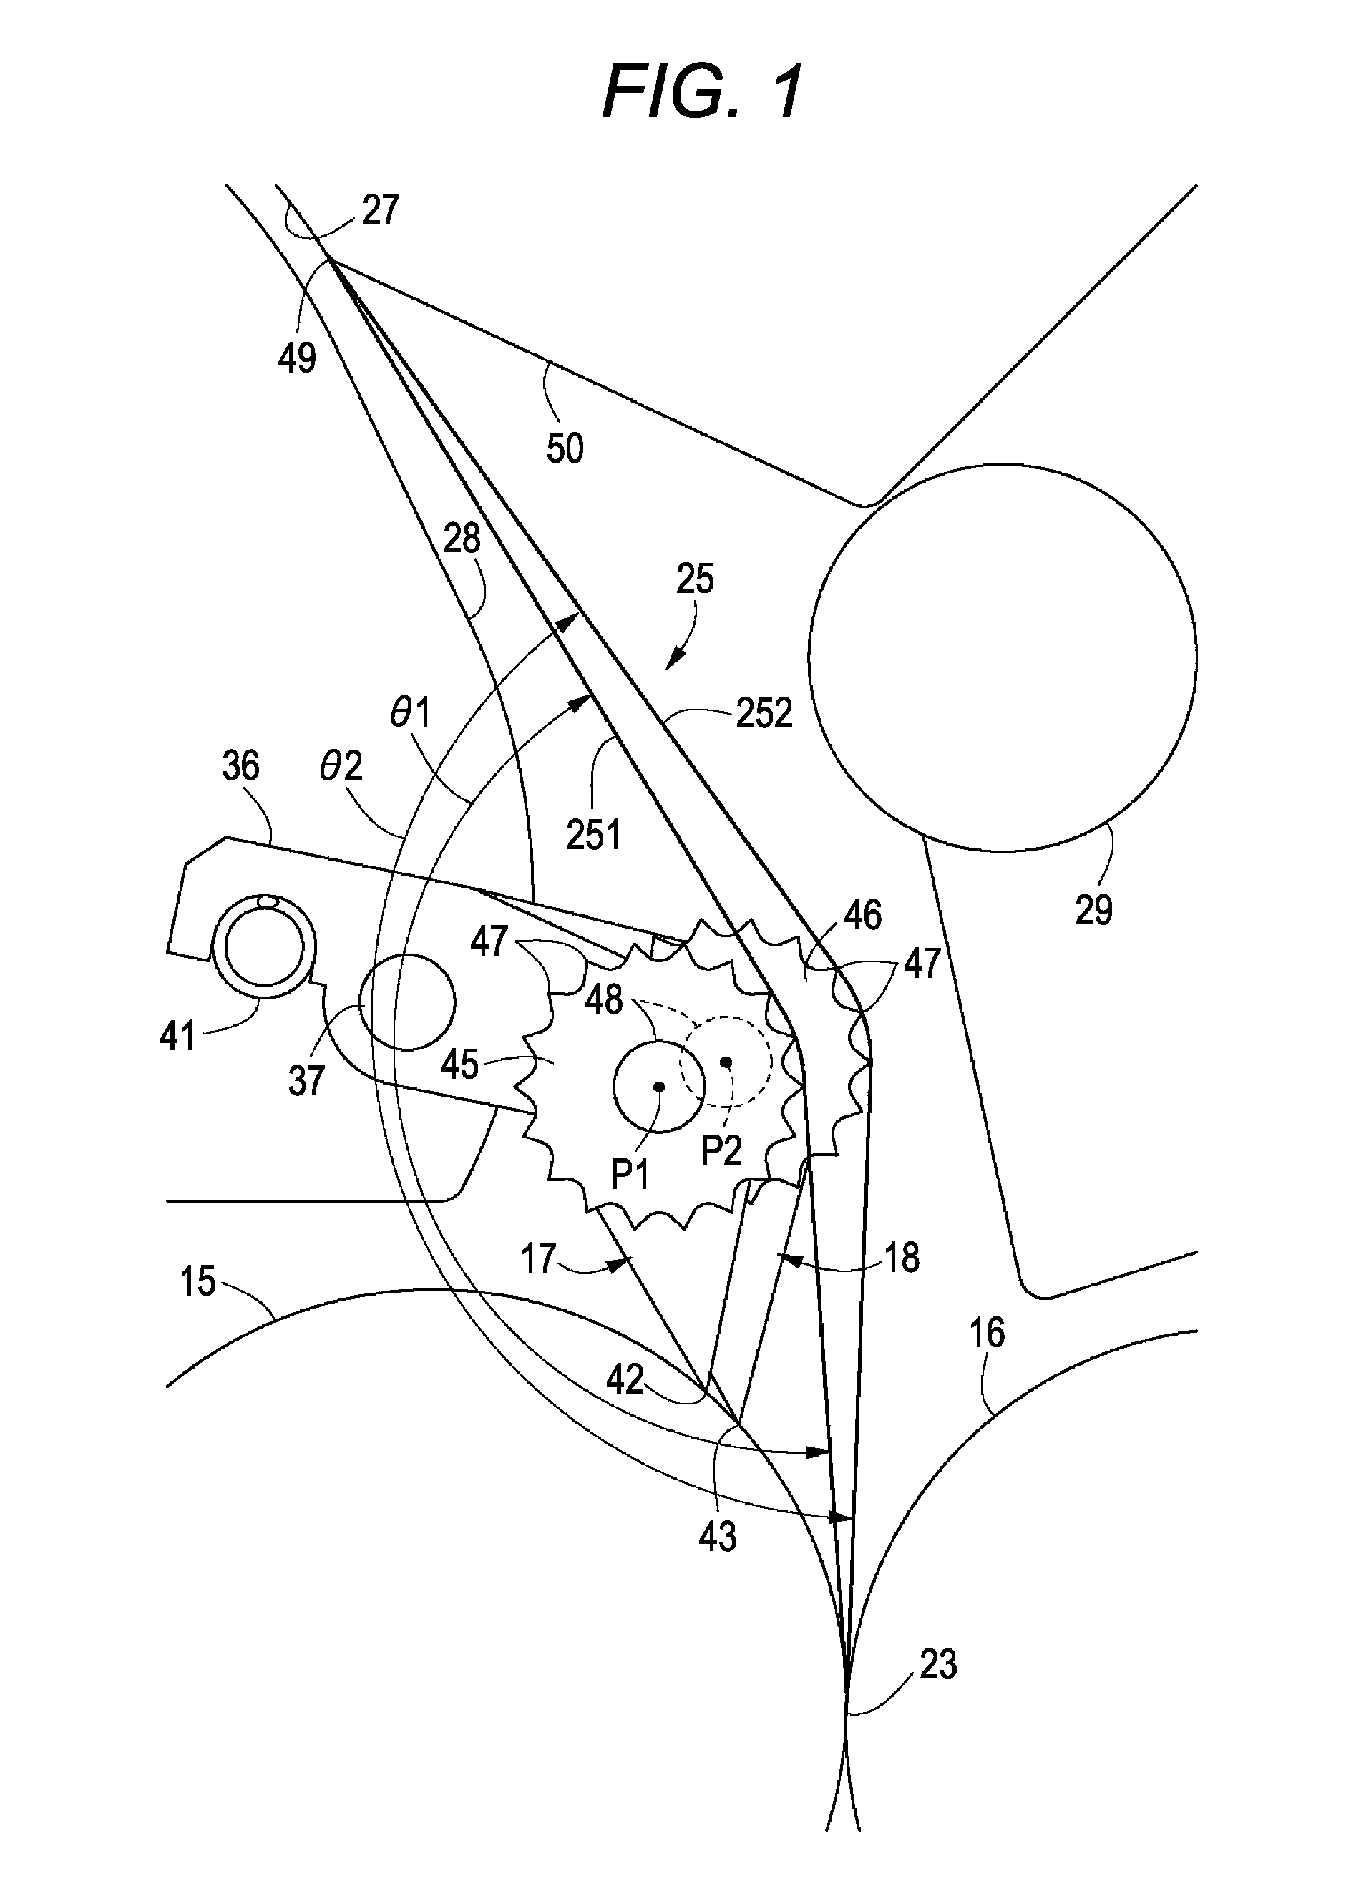 Fusing unit for stable small-sheet feeding in image forming apparatus